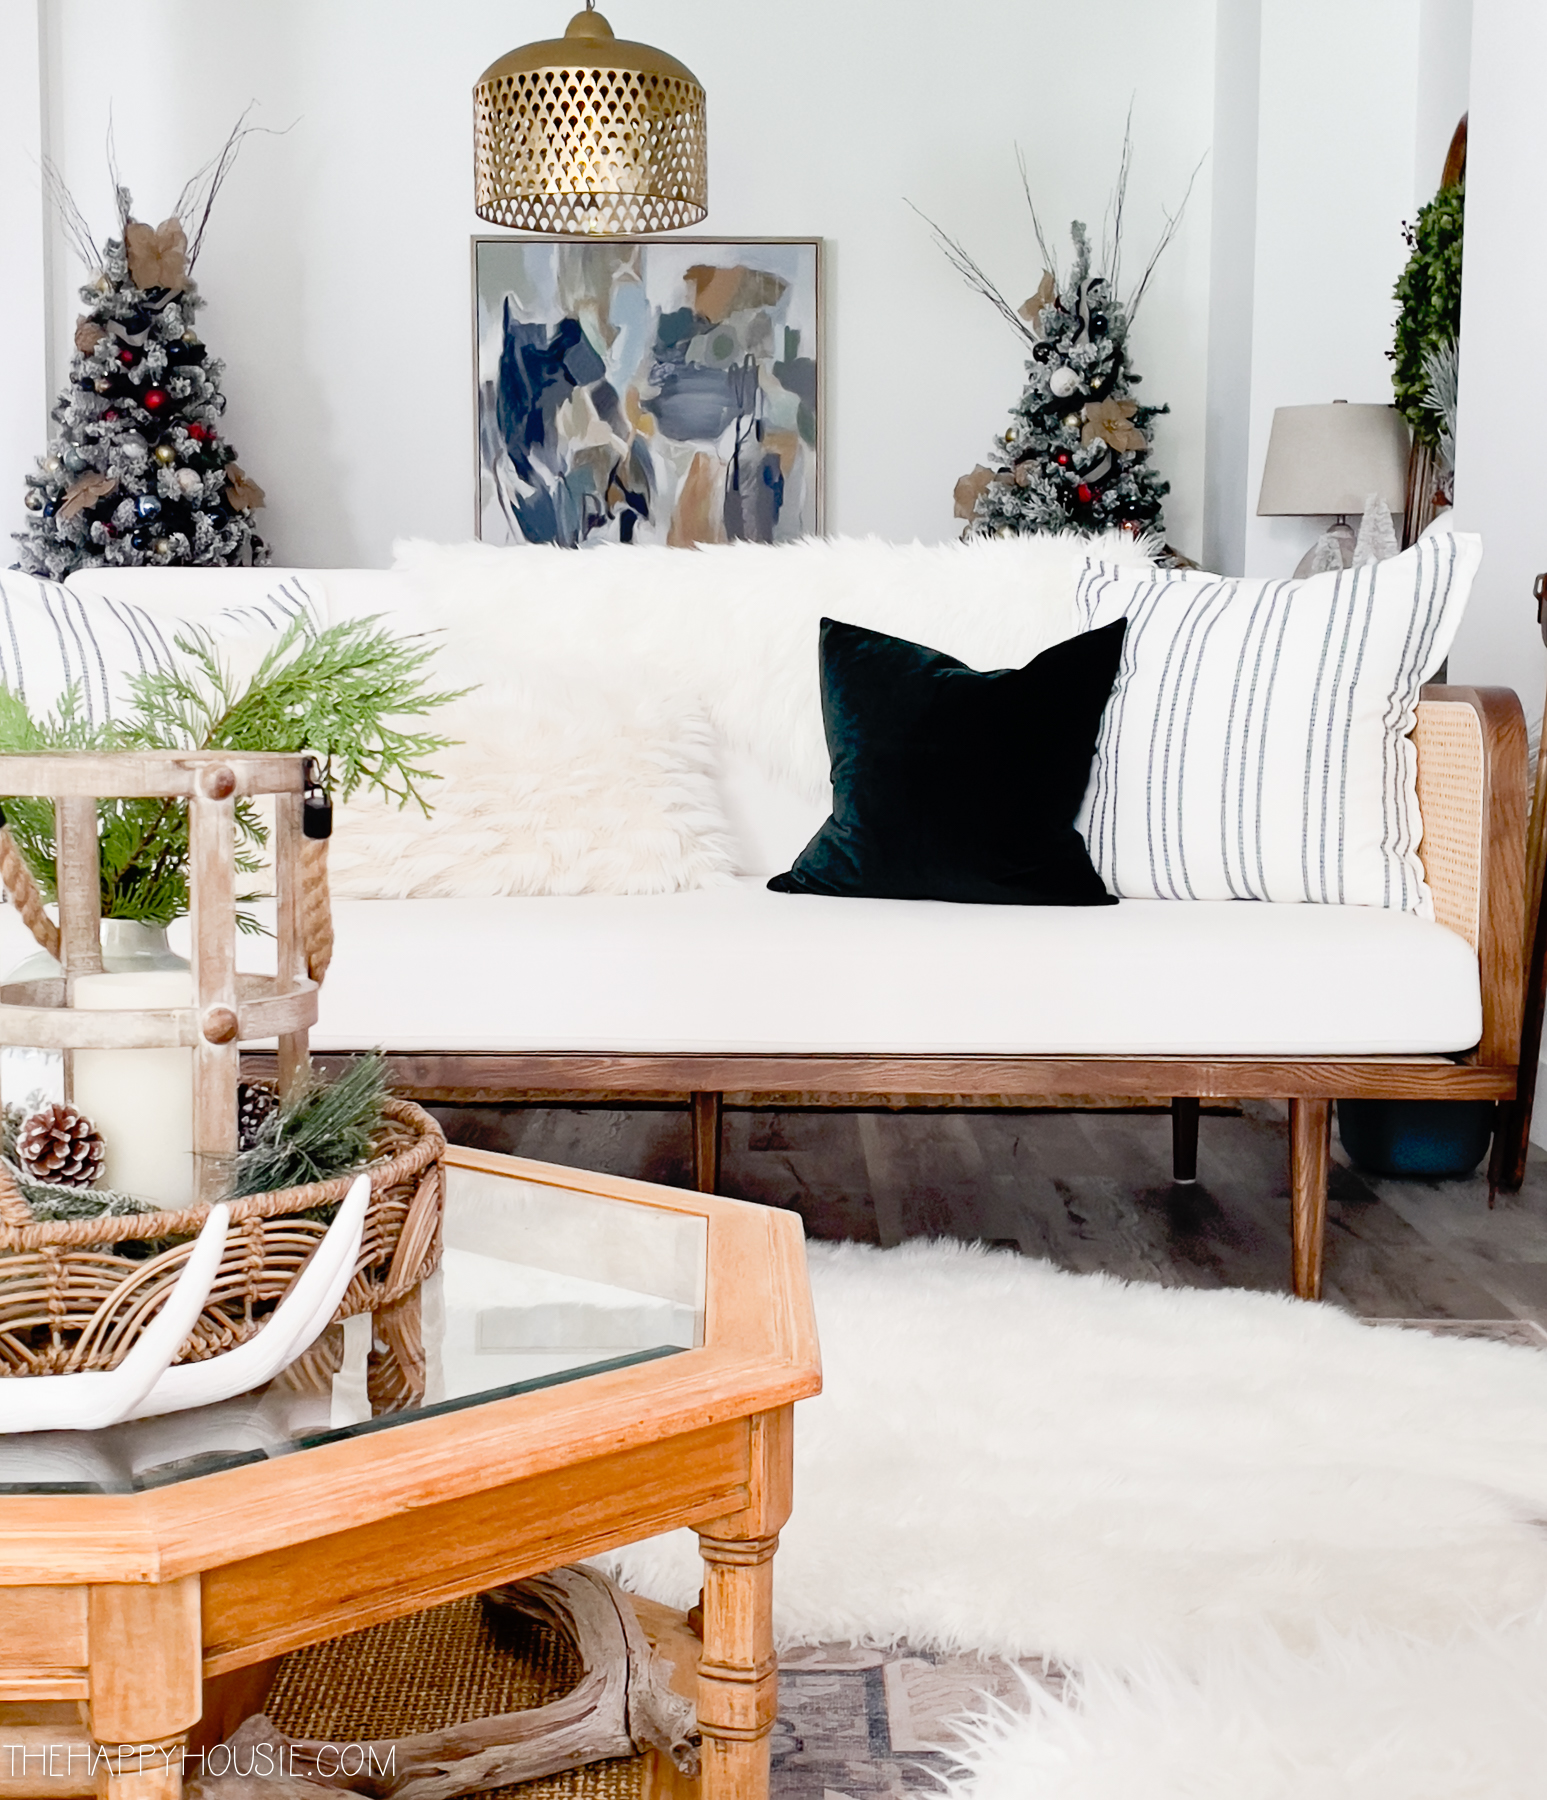 A white loveseat is in the living room.